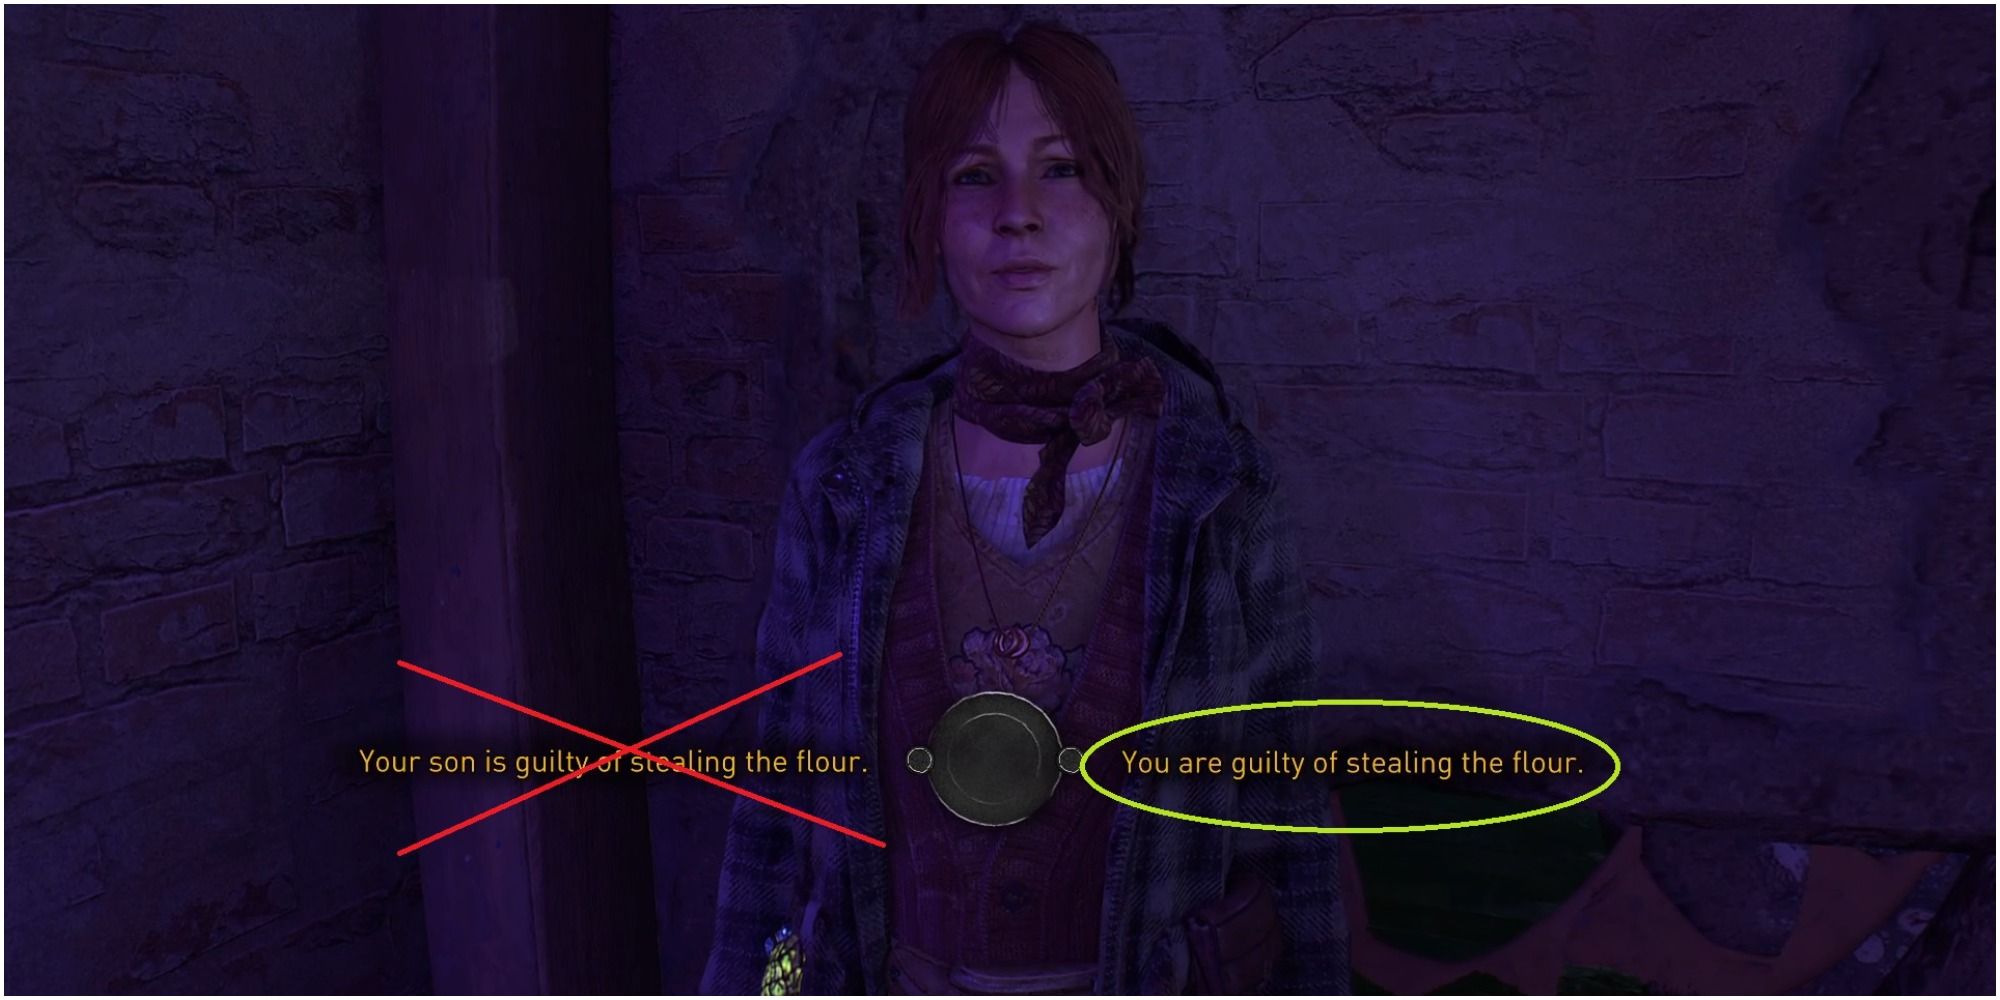 Dying Light 2 Identifying Teresa As The Flour Thief